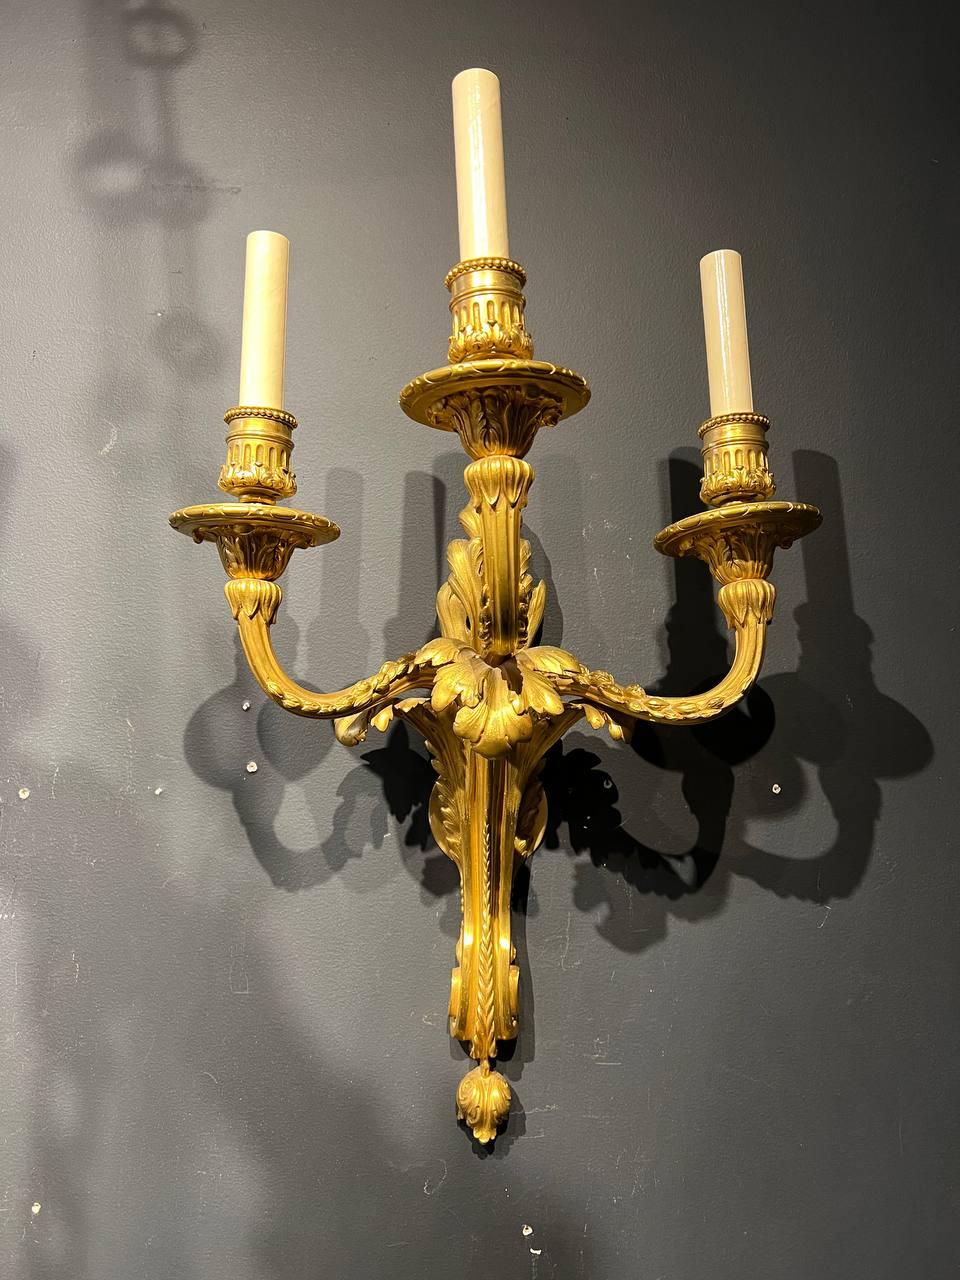 A pair of circa 1900 Caldwell 3 lights French style sconces with acanthus leaves design. 2 pairs available.

Dealer: G302YP

